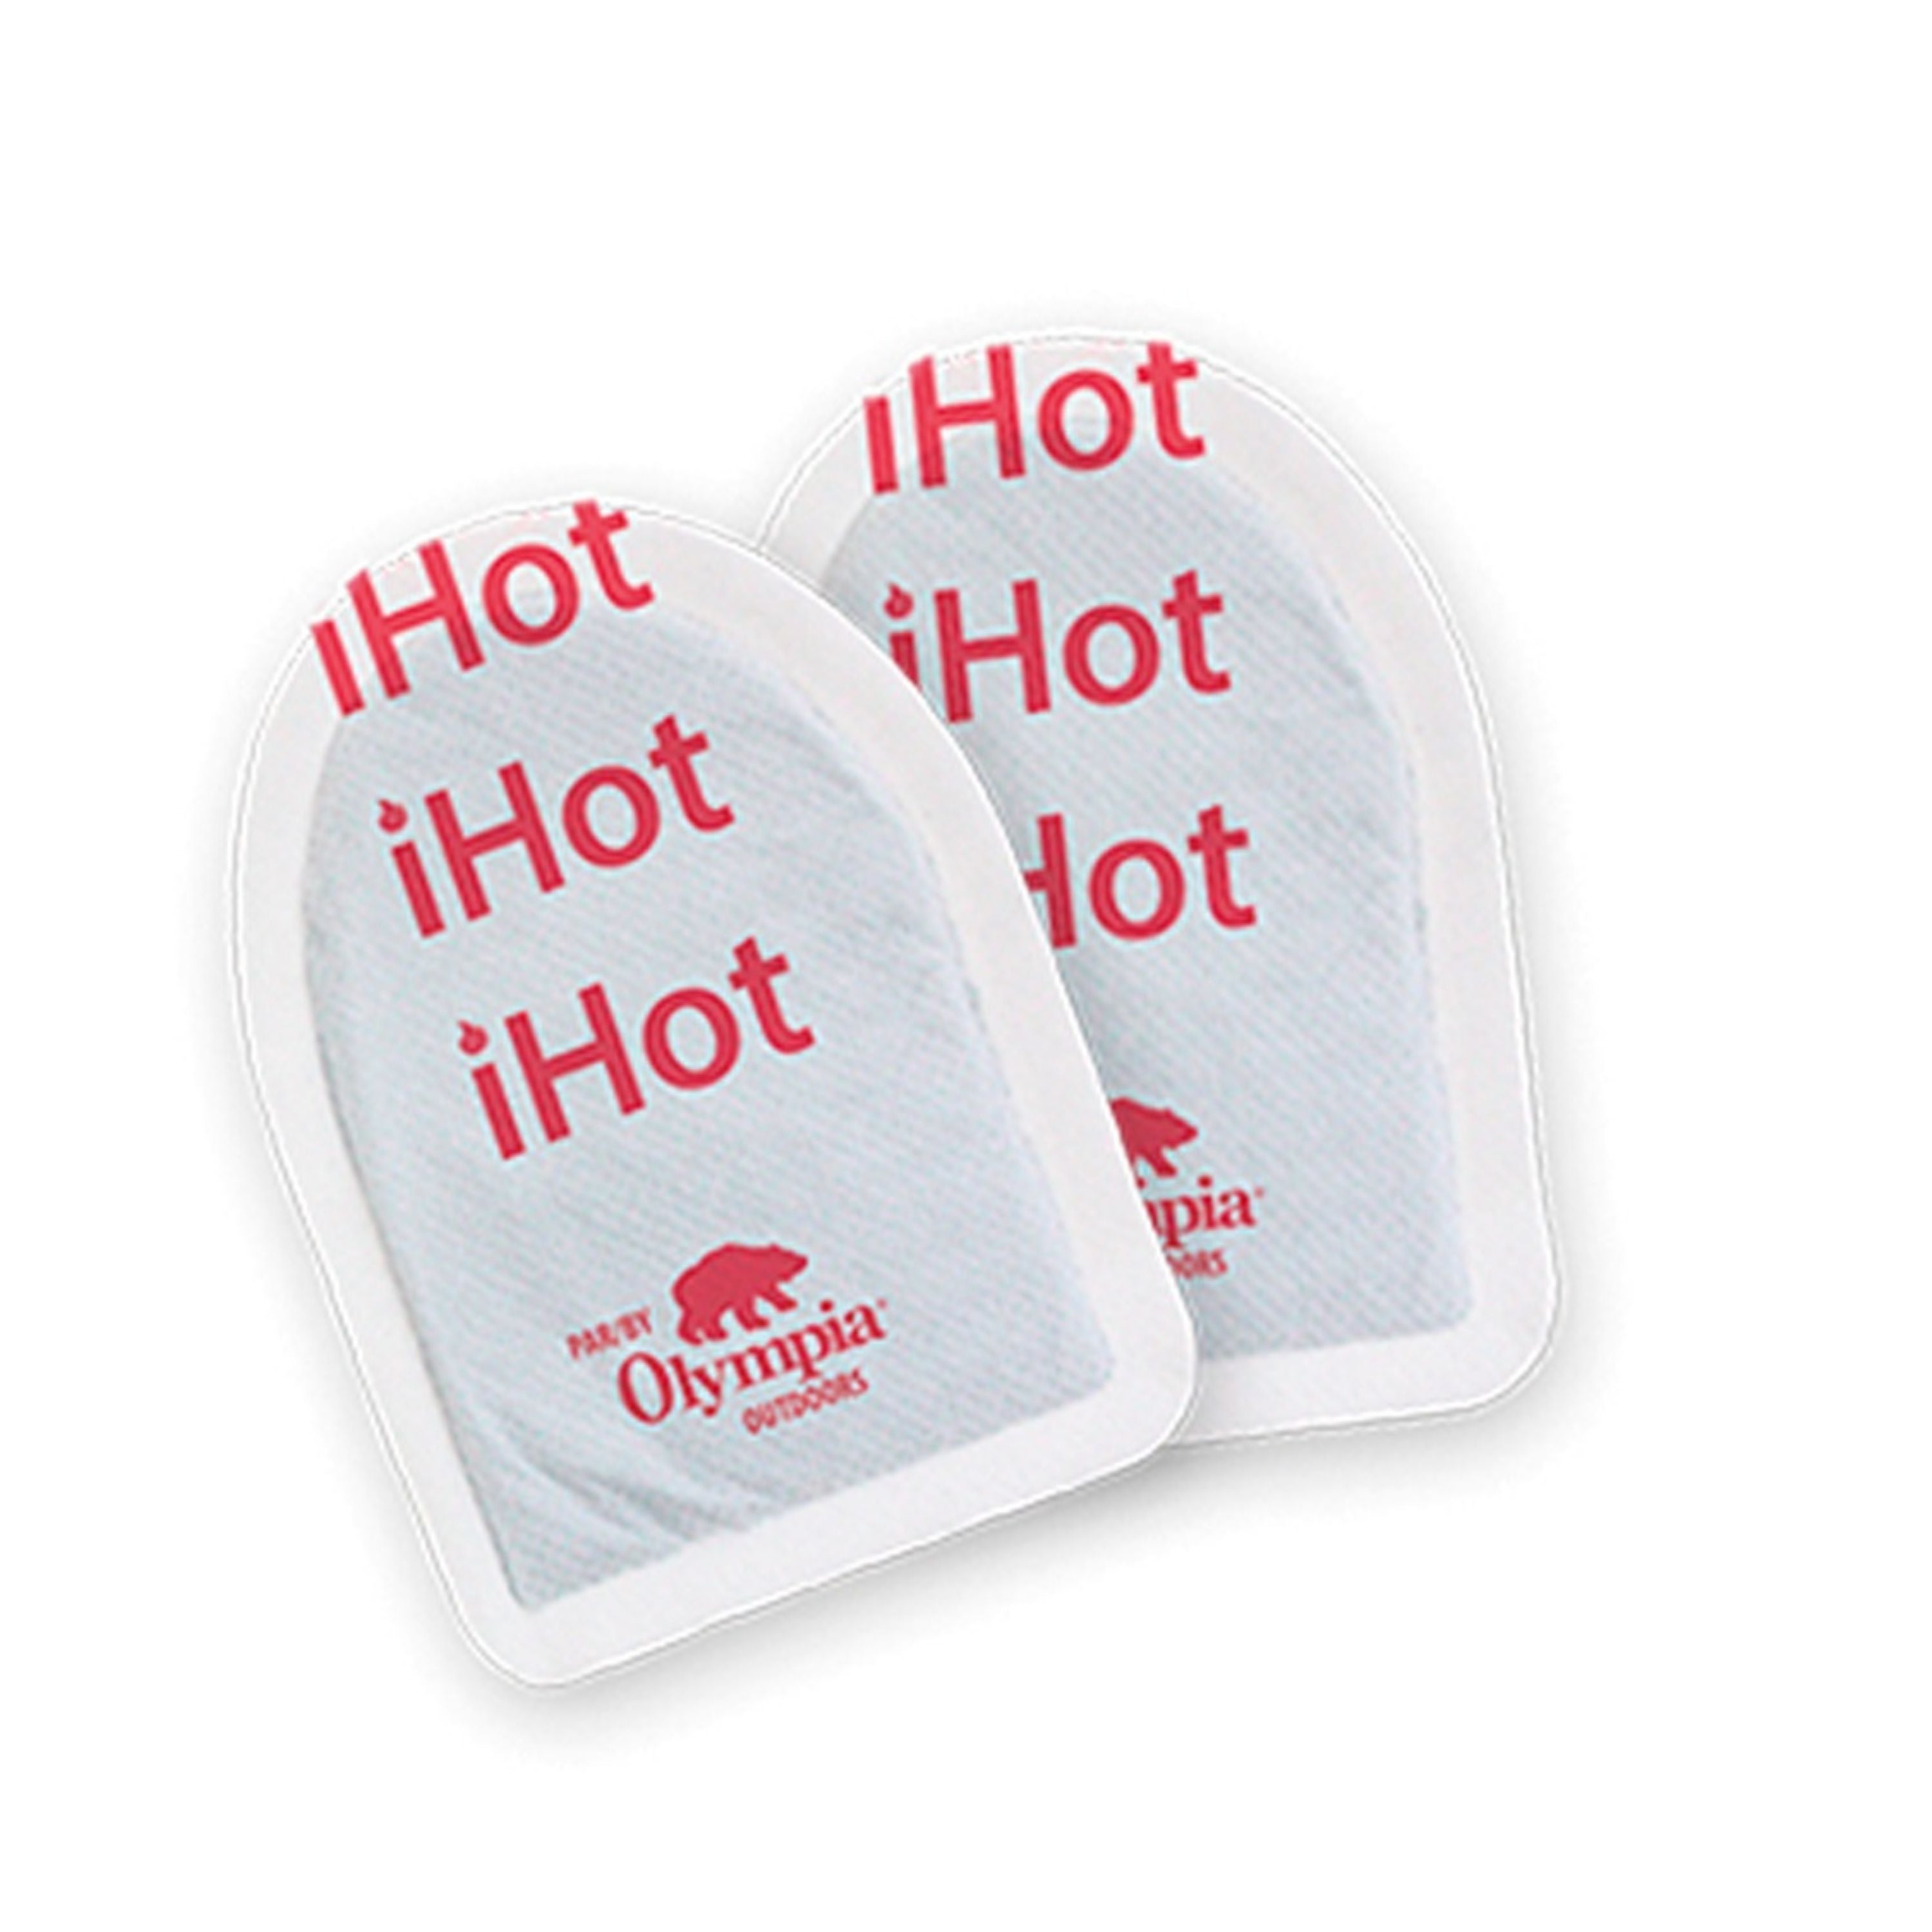 "Ihot" Disposable Toe Warmers - 40 pkg